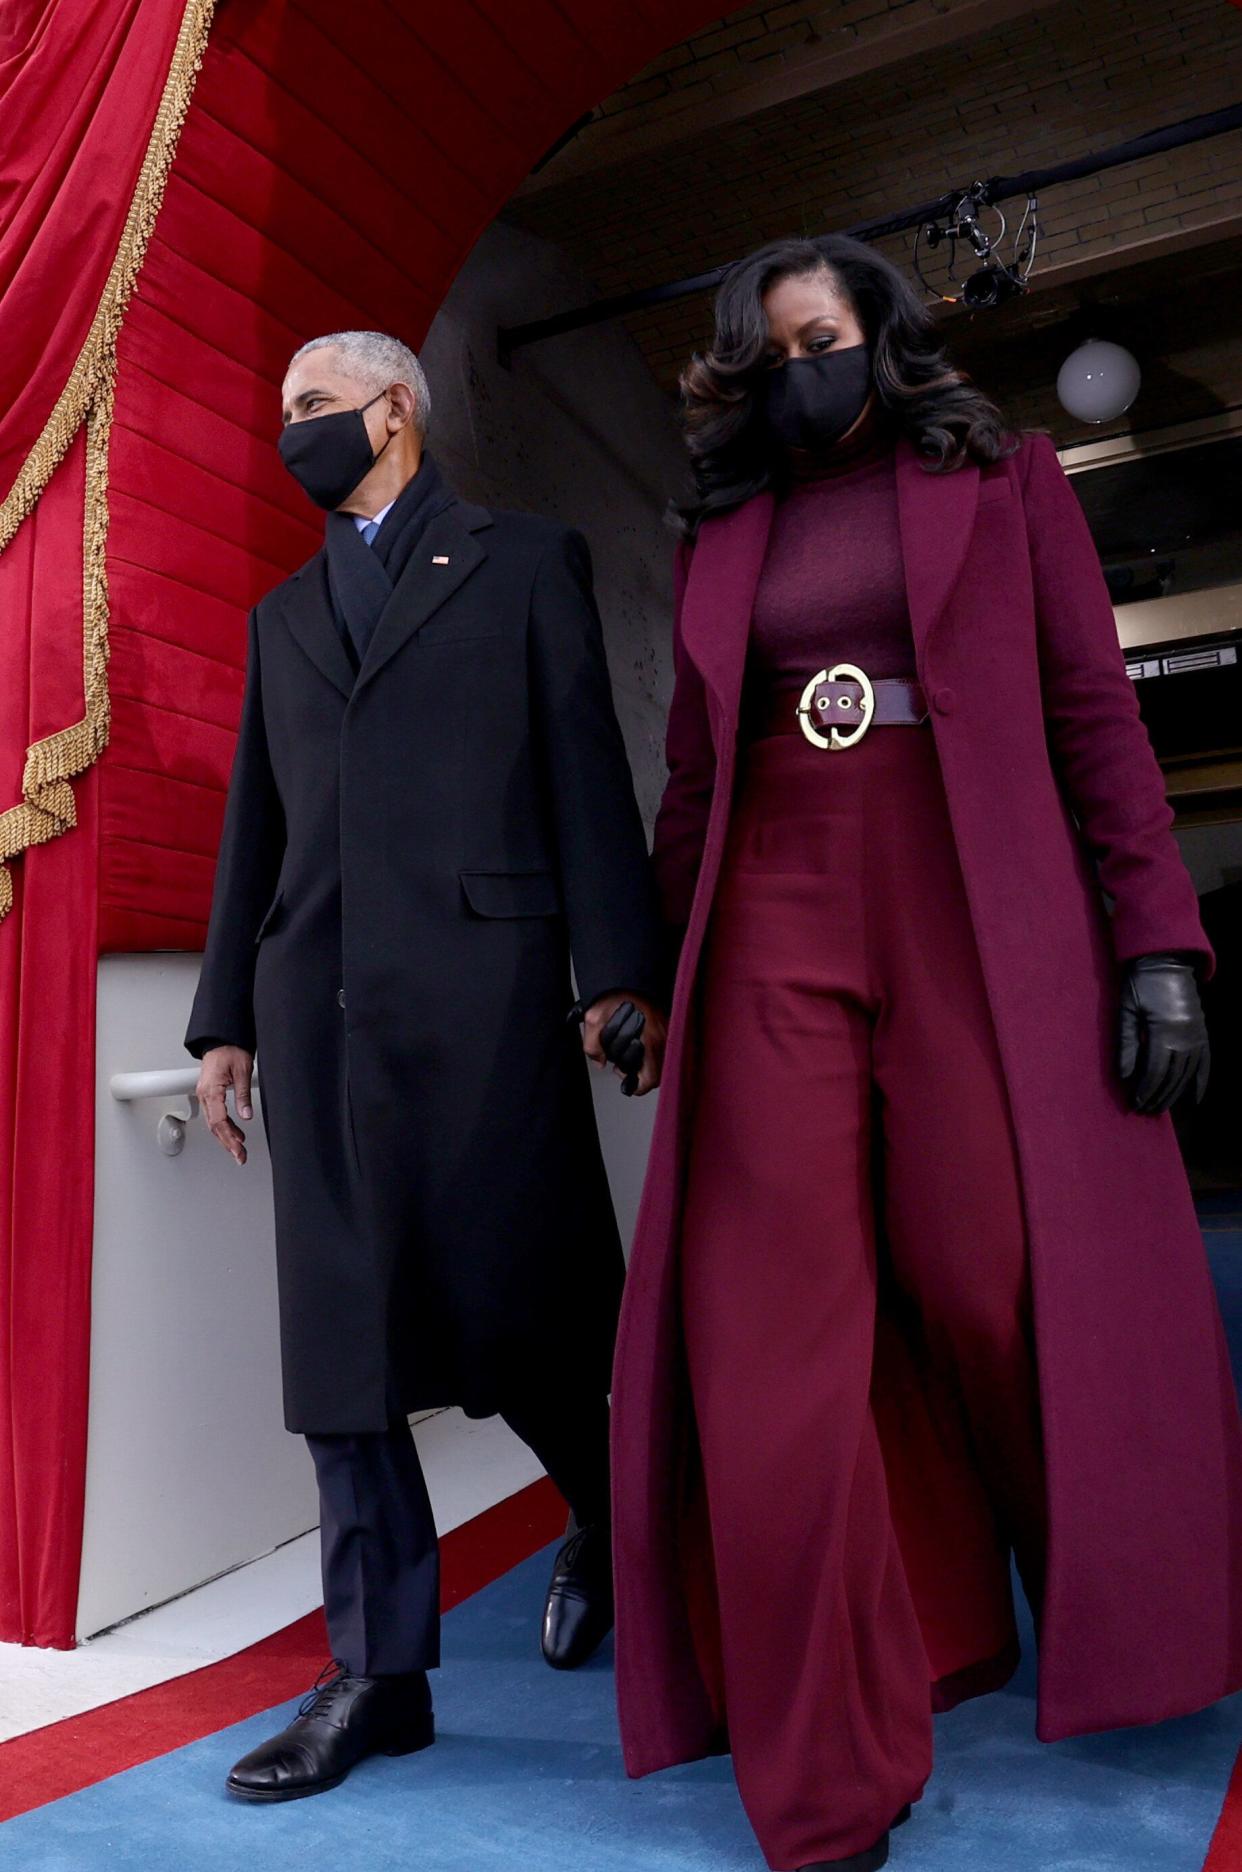 Barack and Michelle Obama arrive at the inauguration ceremony. (Photo: JONATHAN ERNST via Getty Images)